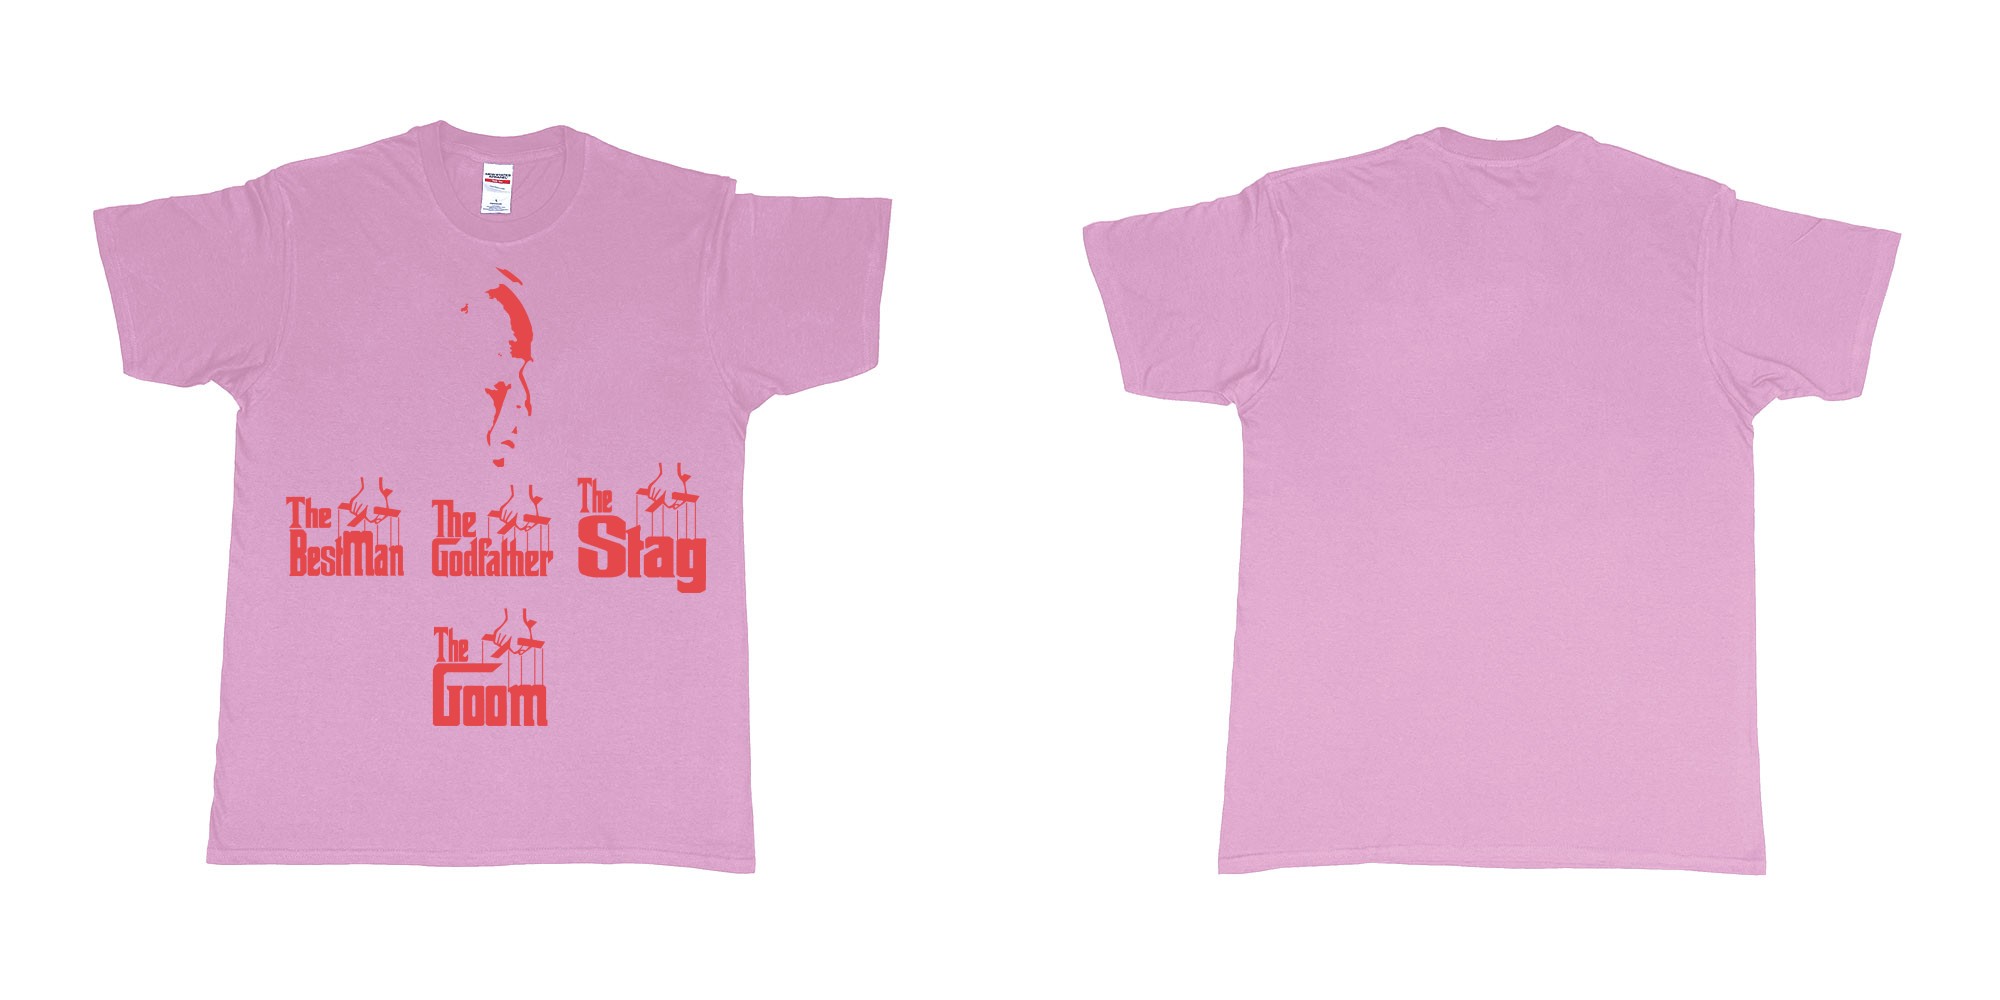 Custom tshirt design TPW the godfather in fabric color light-pink choice your own text made in Bali by The Pirate Way